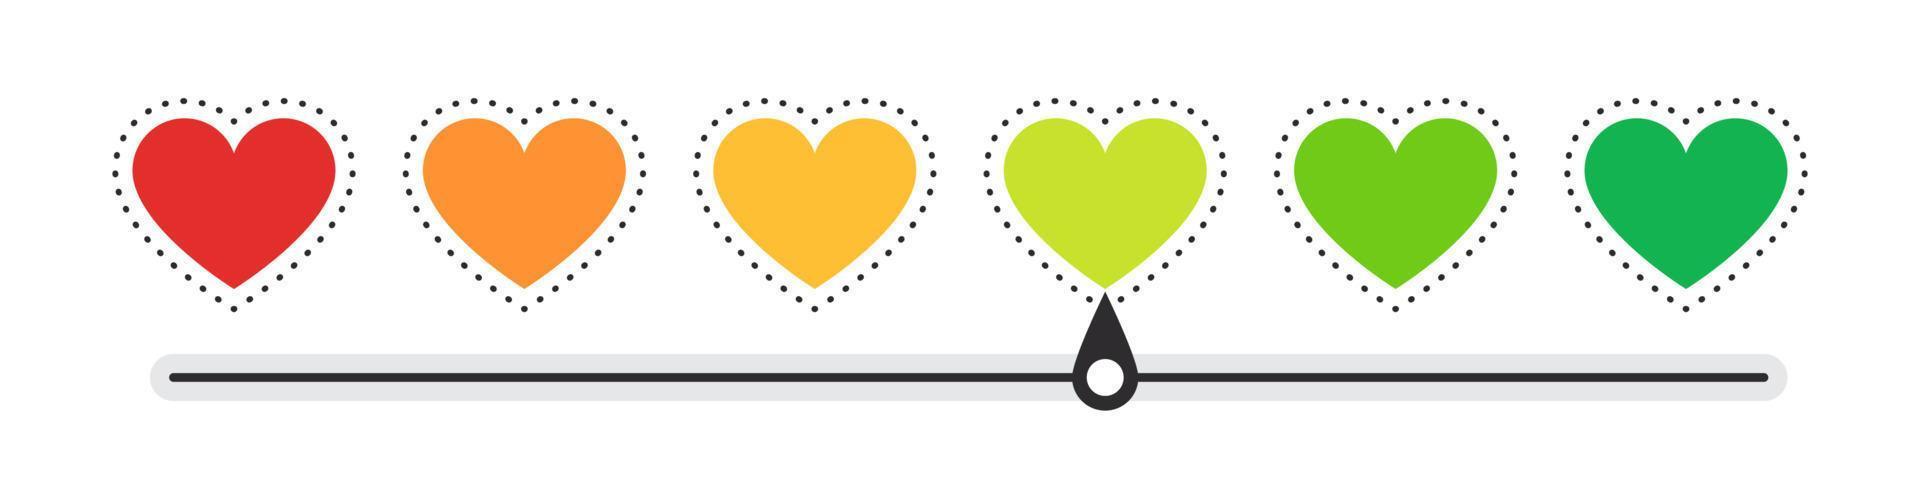 Hearts scale. Mood scale. Satisfaction indicator. Performance measurement client satisfaction. Vector illustration